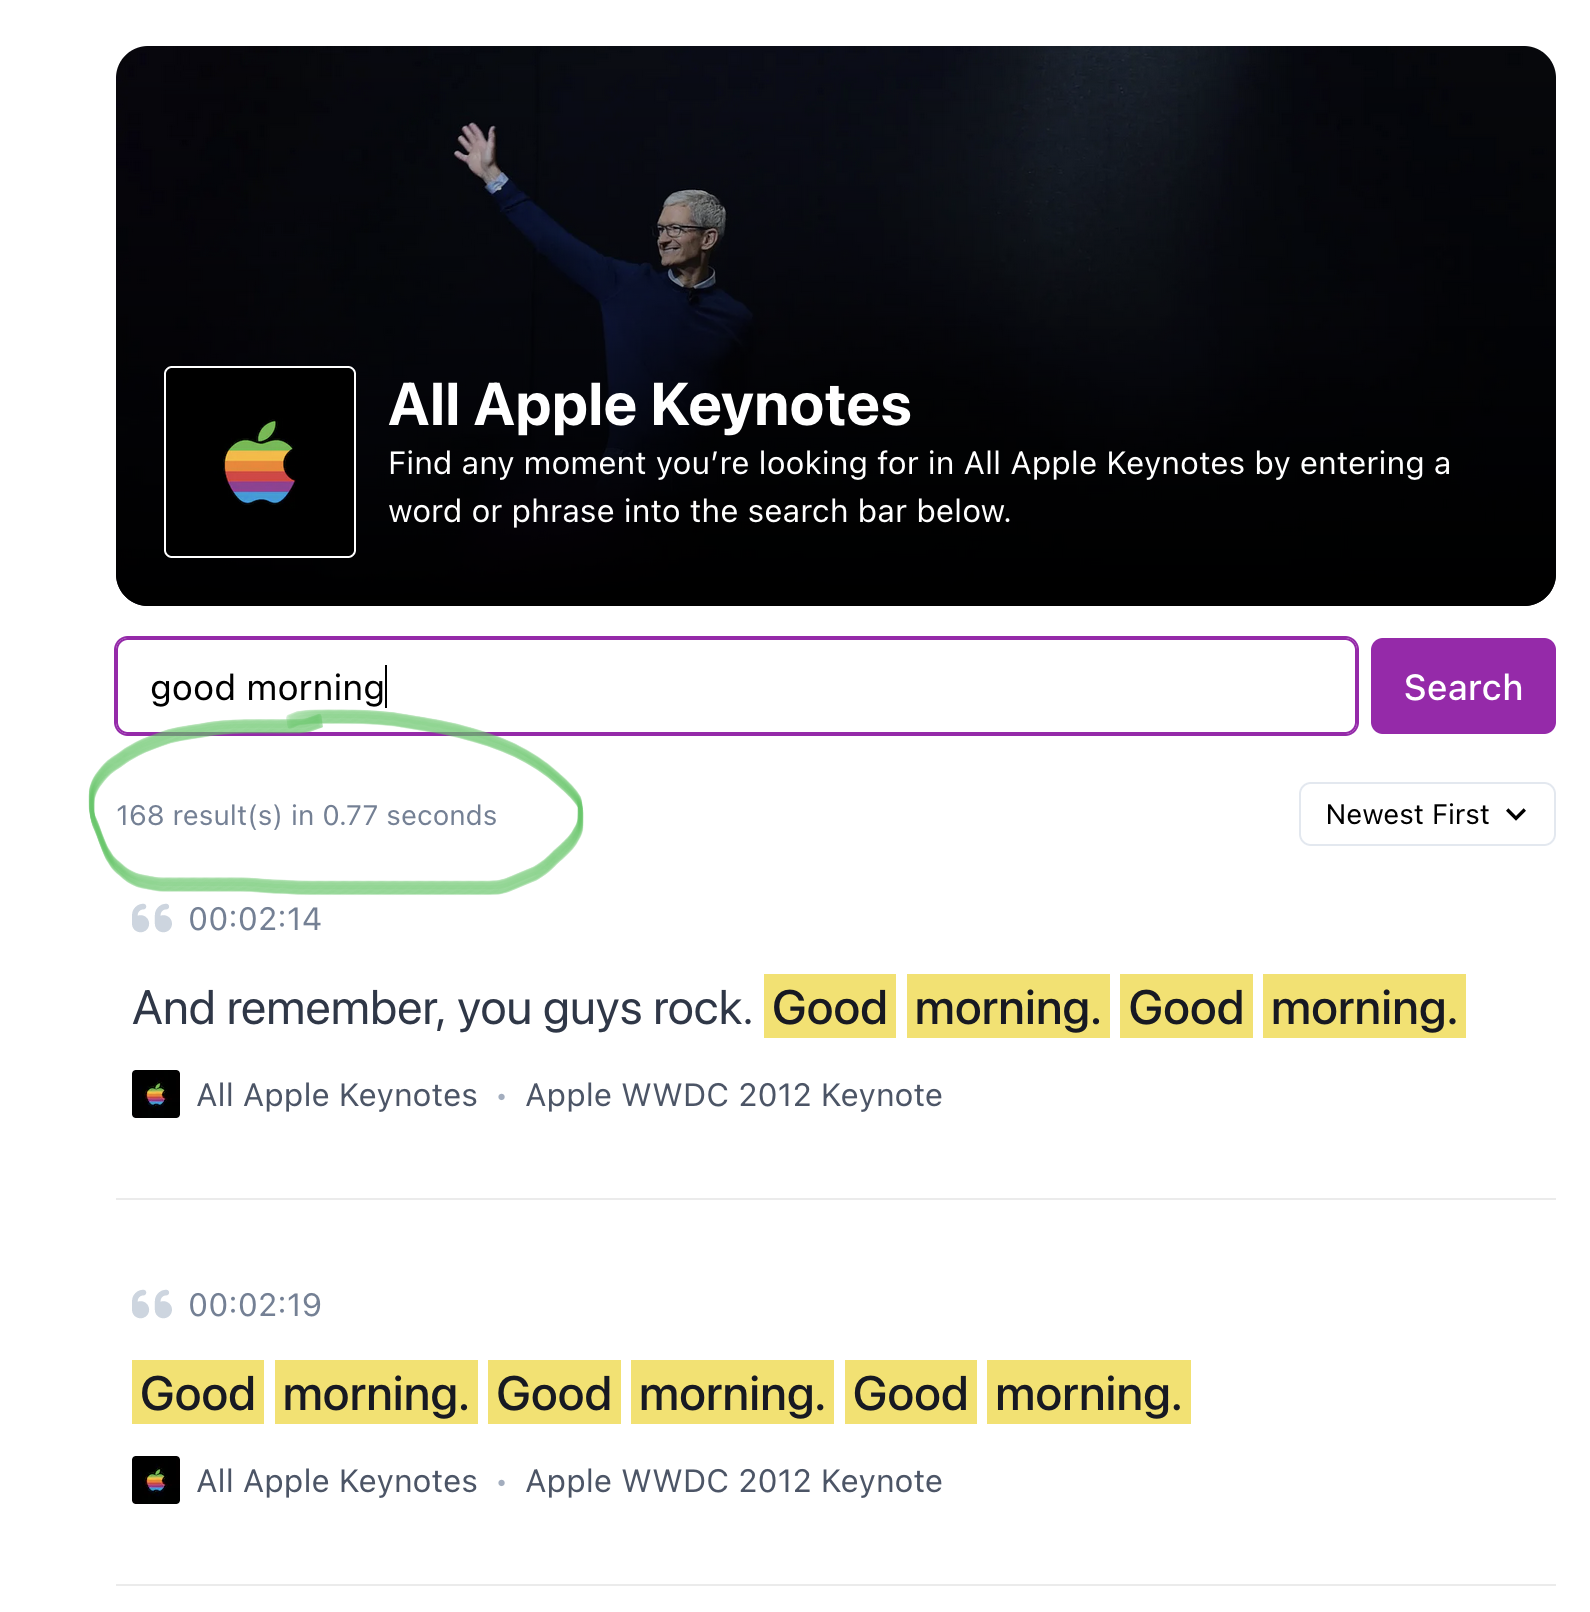 Screenshot of a website that searches Apple keynotes, including a search for “good morning” and the results; of which there are 168 results, which I have highlighted with a green circle.